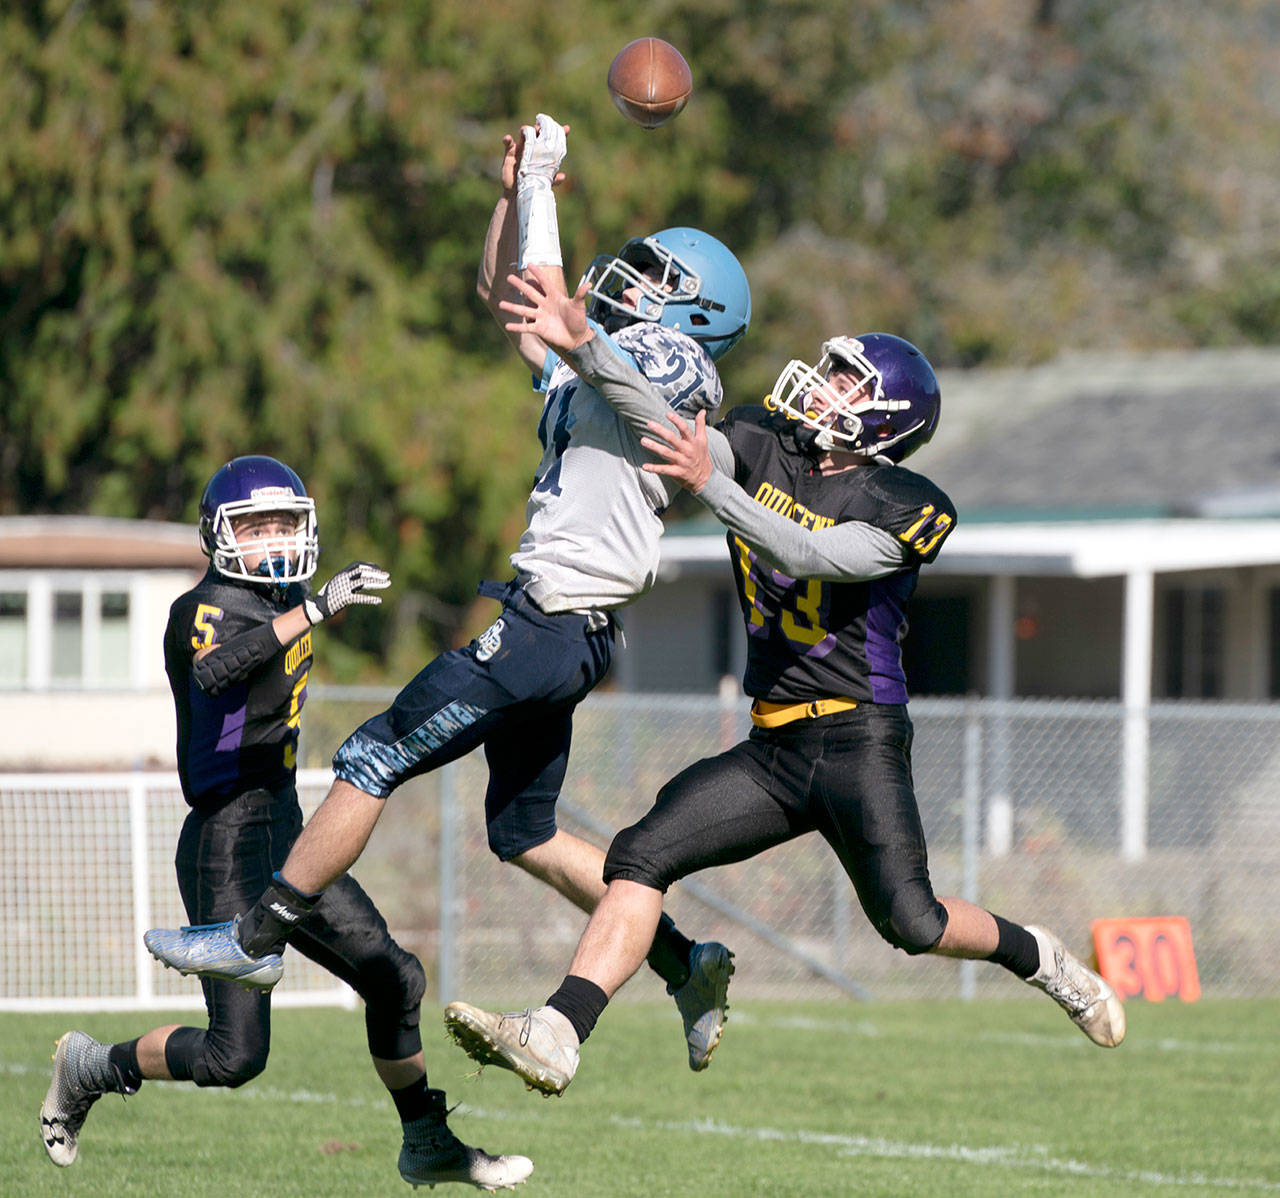 Quilcene’s Olin Reynolds breaks up a pass intended for Rainier Christian’s Landen Bruce during a game in Quilcene on Saturday. Ranger Isaac Dugdale (5) is poised to assist in the play. (Steve Mullensky /for Peninsula Daily News)